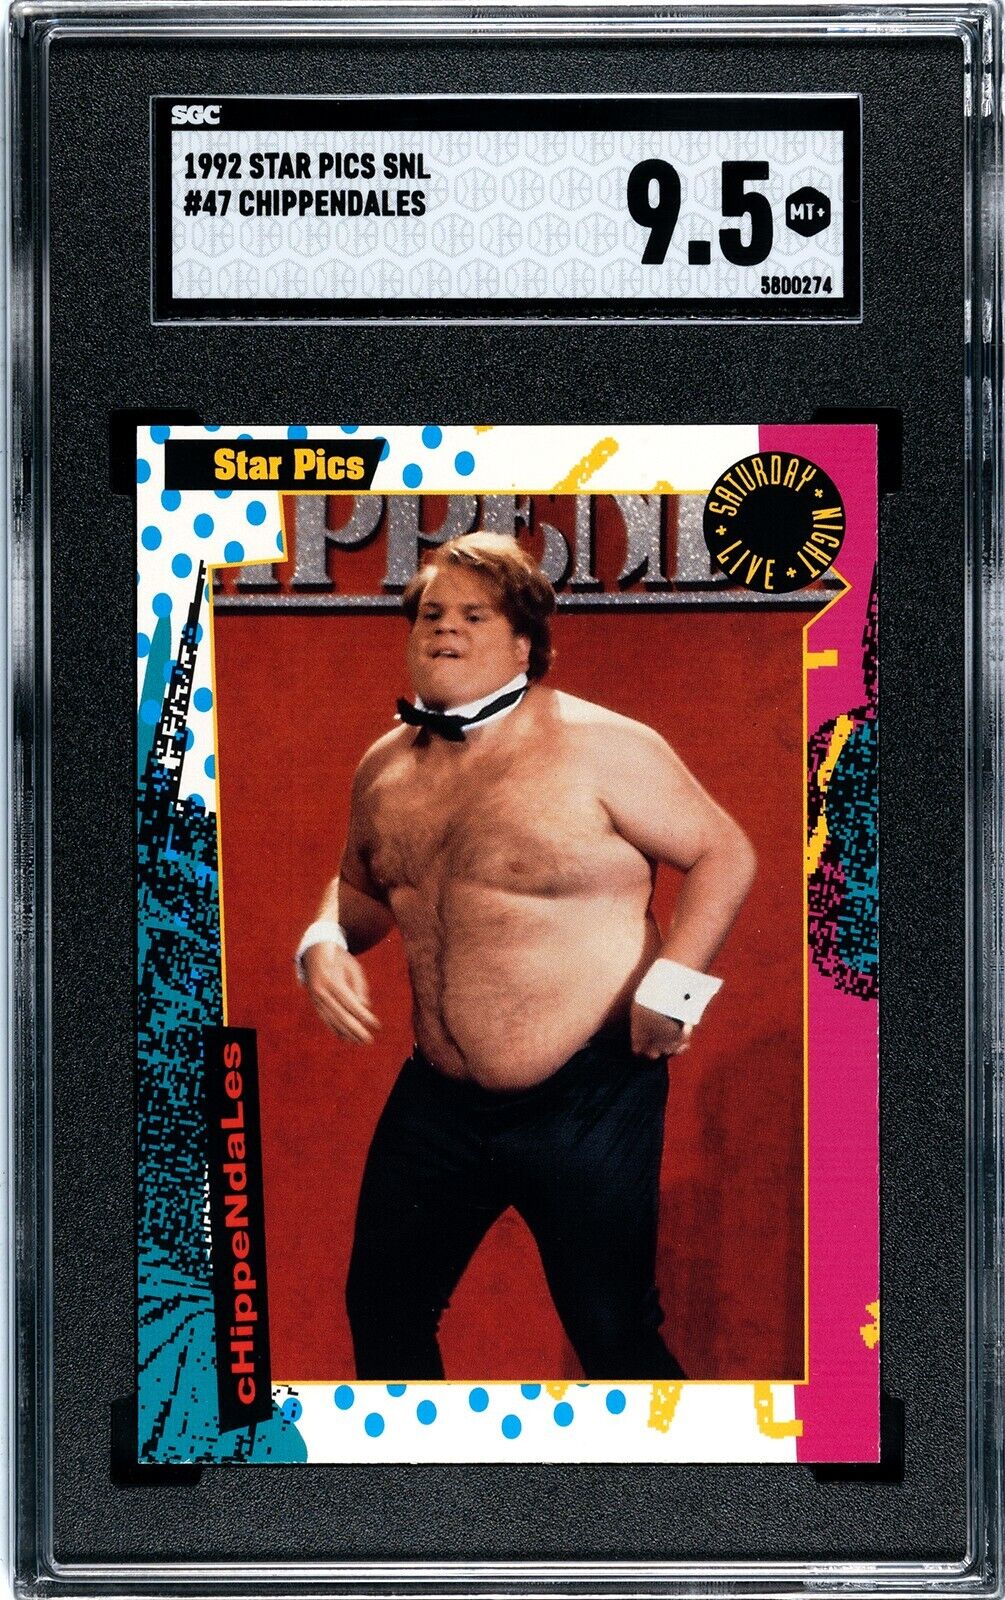 1992 STAR PICS SATURDAY NIGHT LIVE CHRIS FARLEY CHIPPENDALES #47 SGC 9.5, ONLY 1